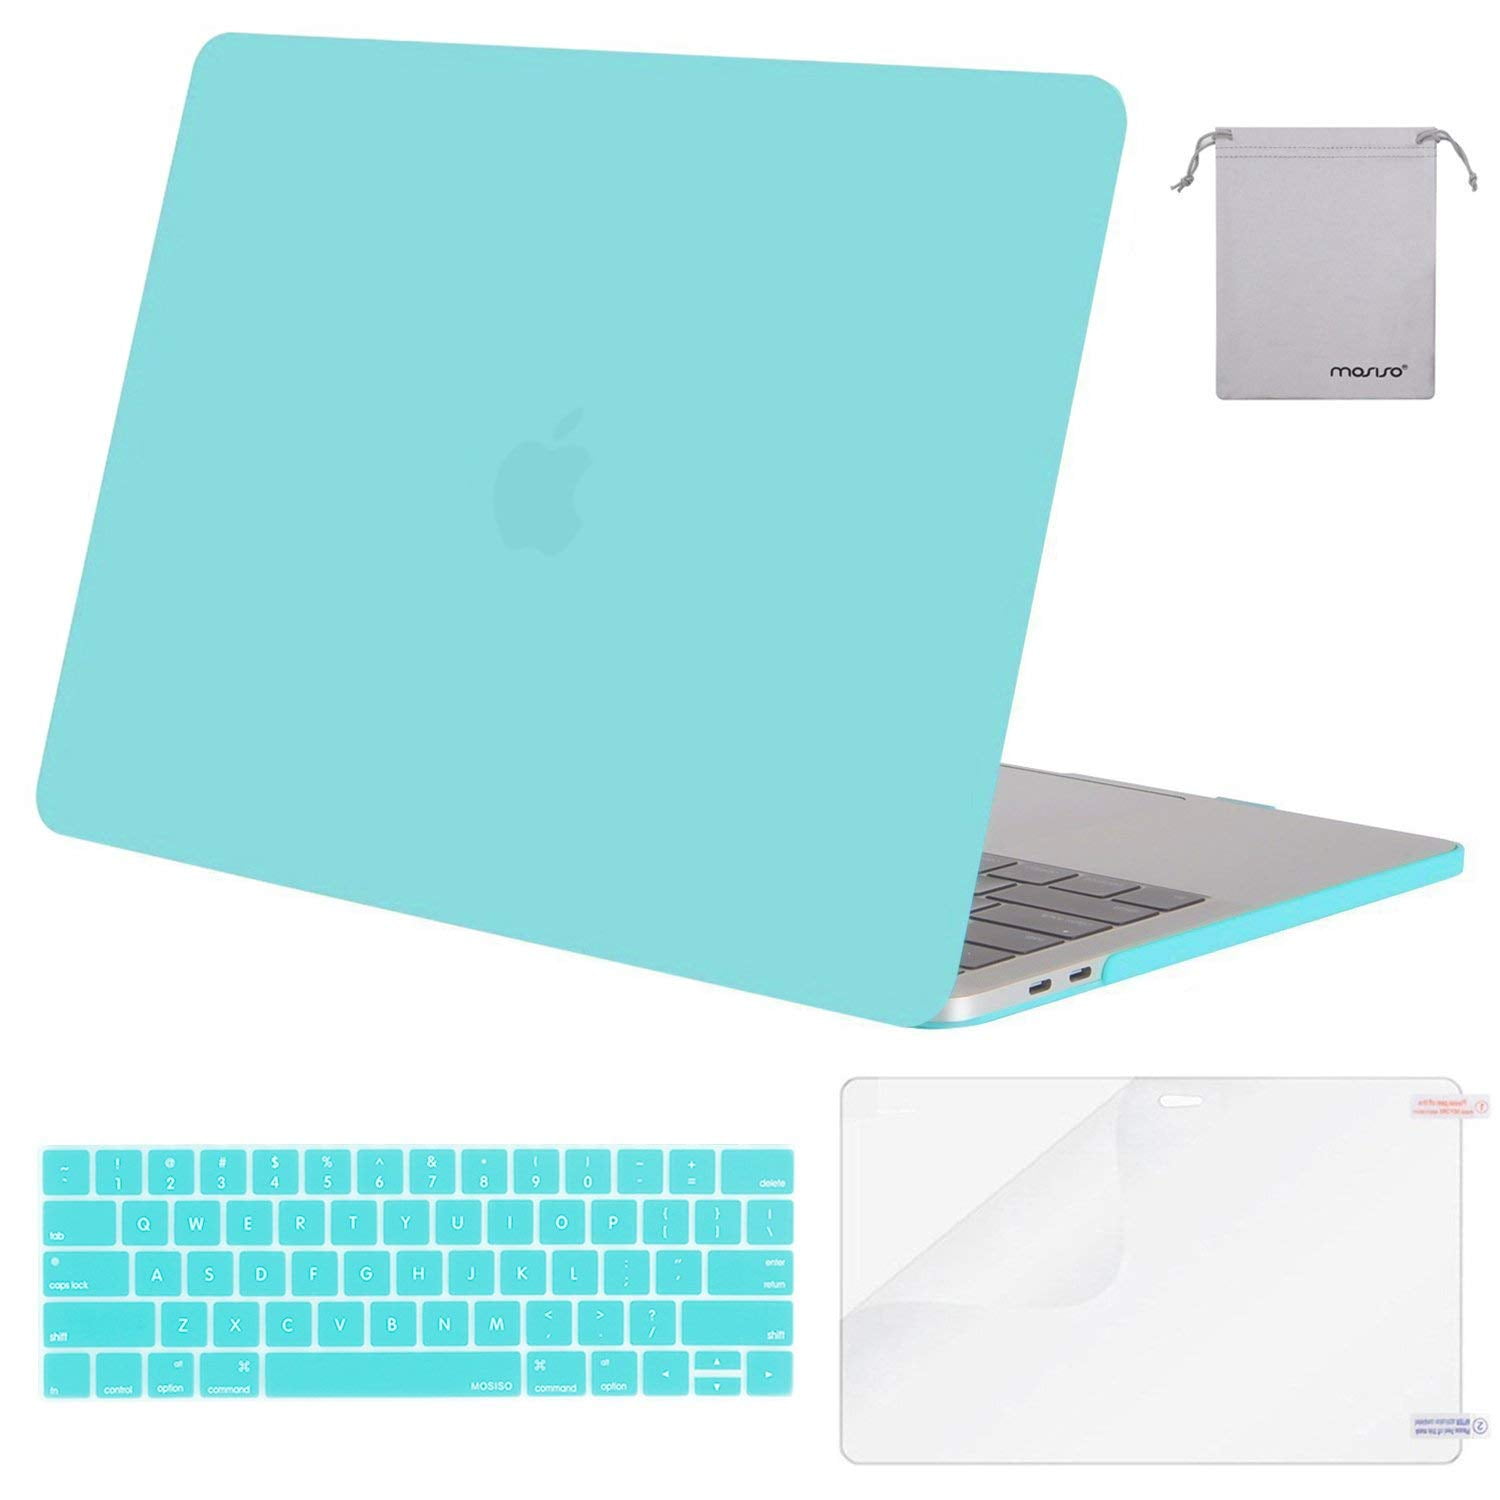 Plastic Hard Shell Case & Keyboard Cover Skin & Webcam Cover Rock Gray MOSISO Compatible with MacBook Pro 13 inch Case 2016-2020 Release A2338 M1 A2289 A2251 A2159 A1989 A1706 A1708 